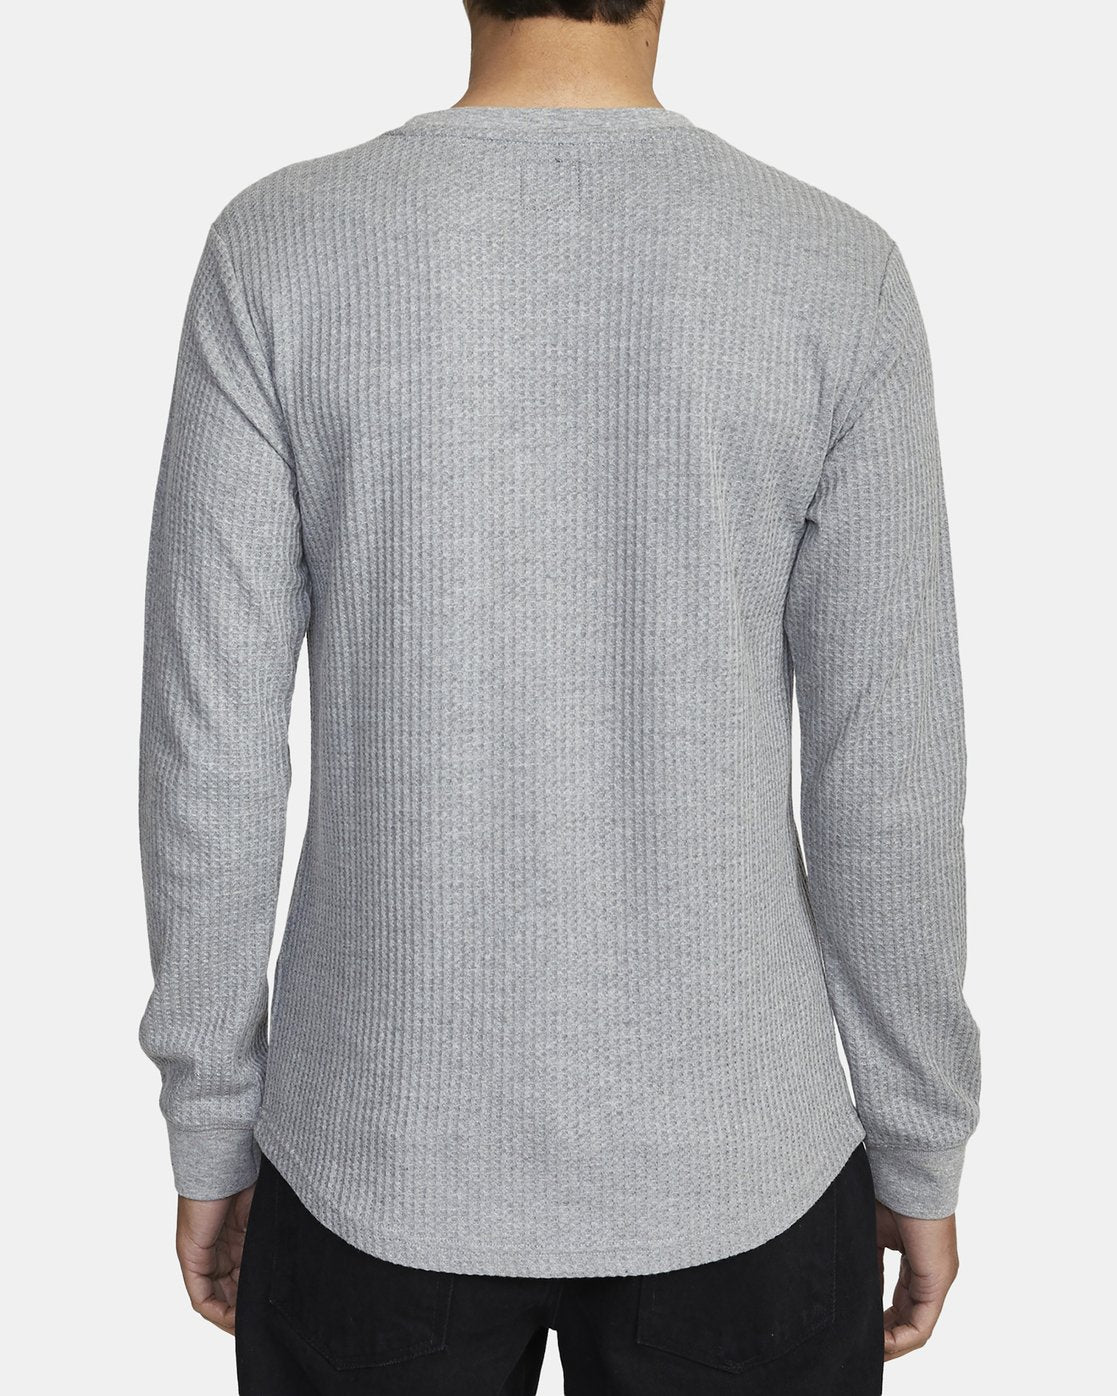 RVCA DAY SHIFT THERMAL LS GREY NOISE